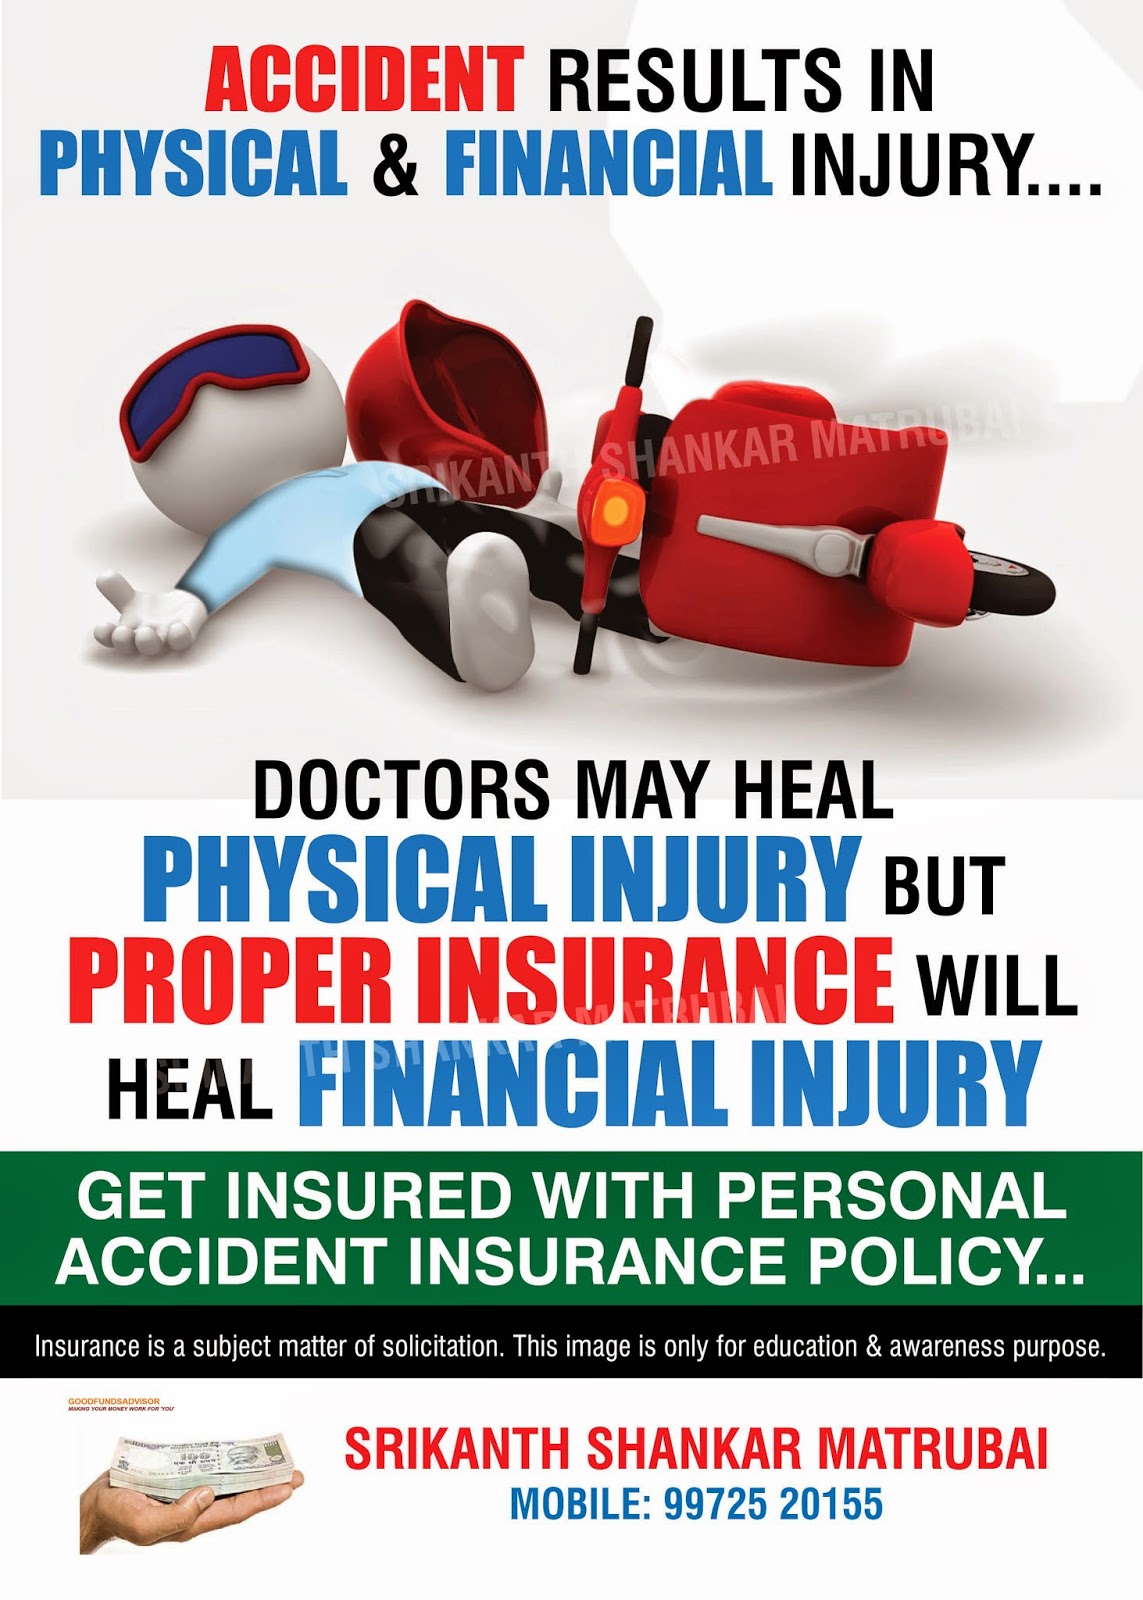 Personal Car Accident Insurance